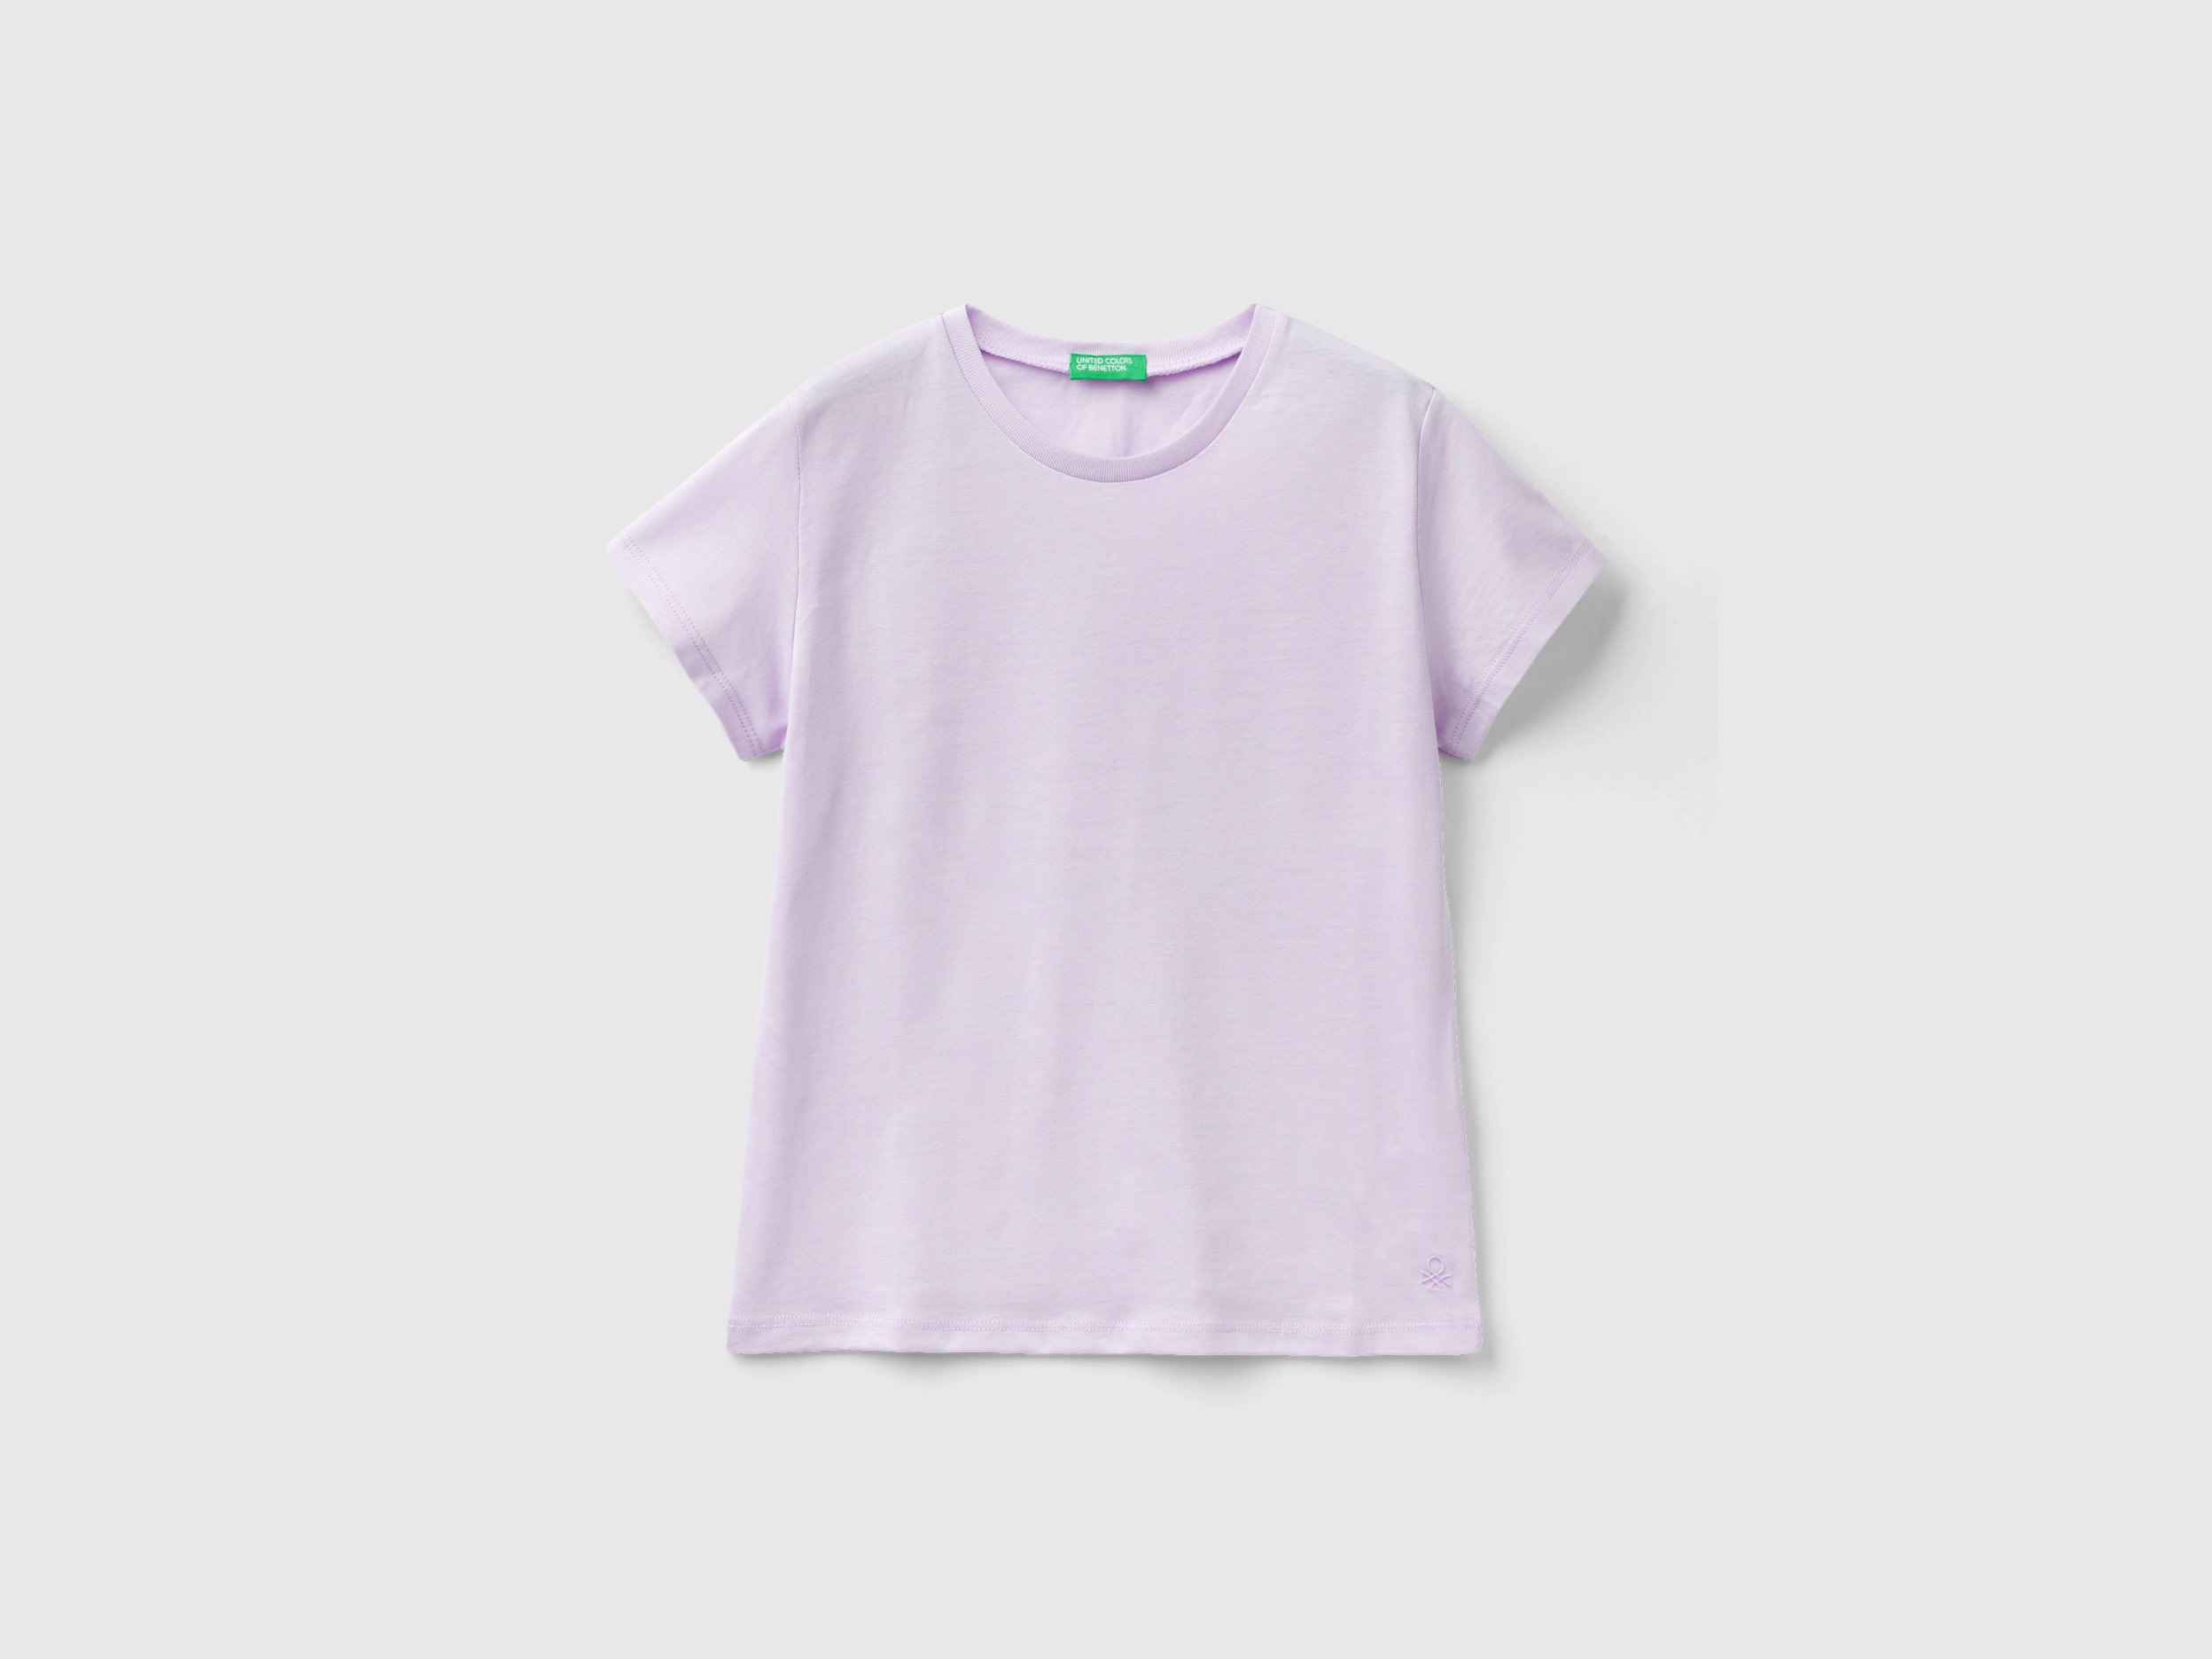 Image of Benetton, T-shirt In Pure Organic Cotton, size M, Lilac, Kids